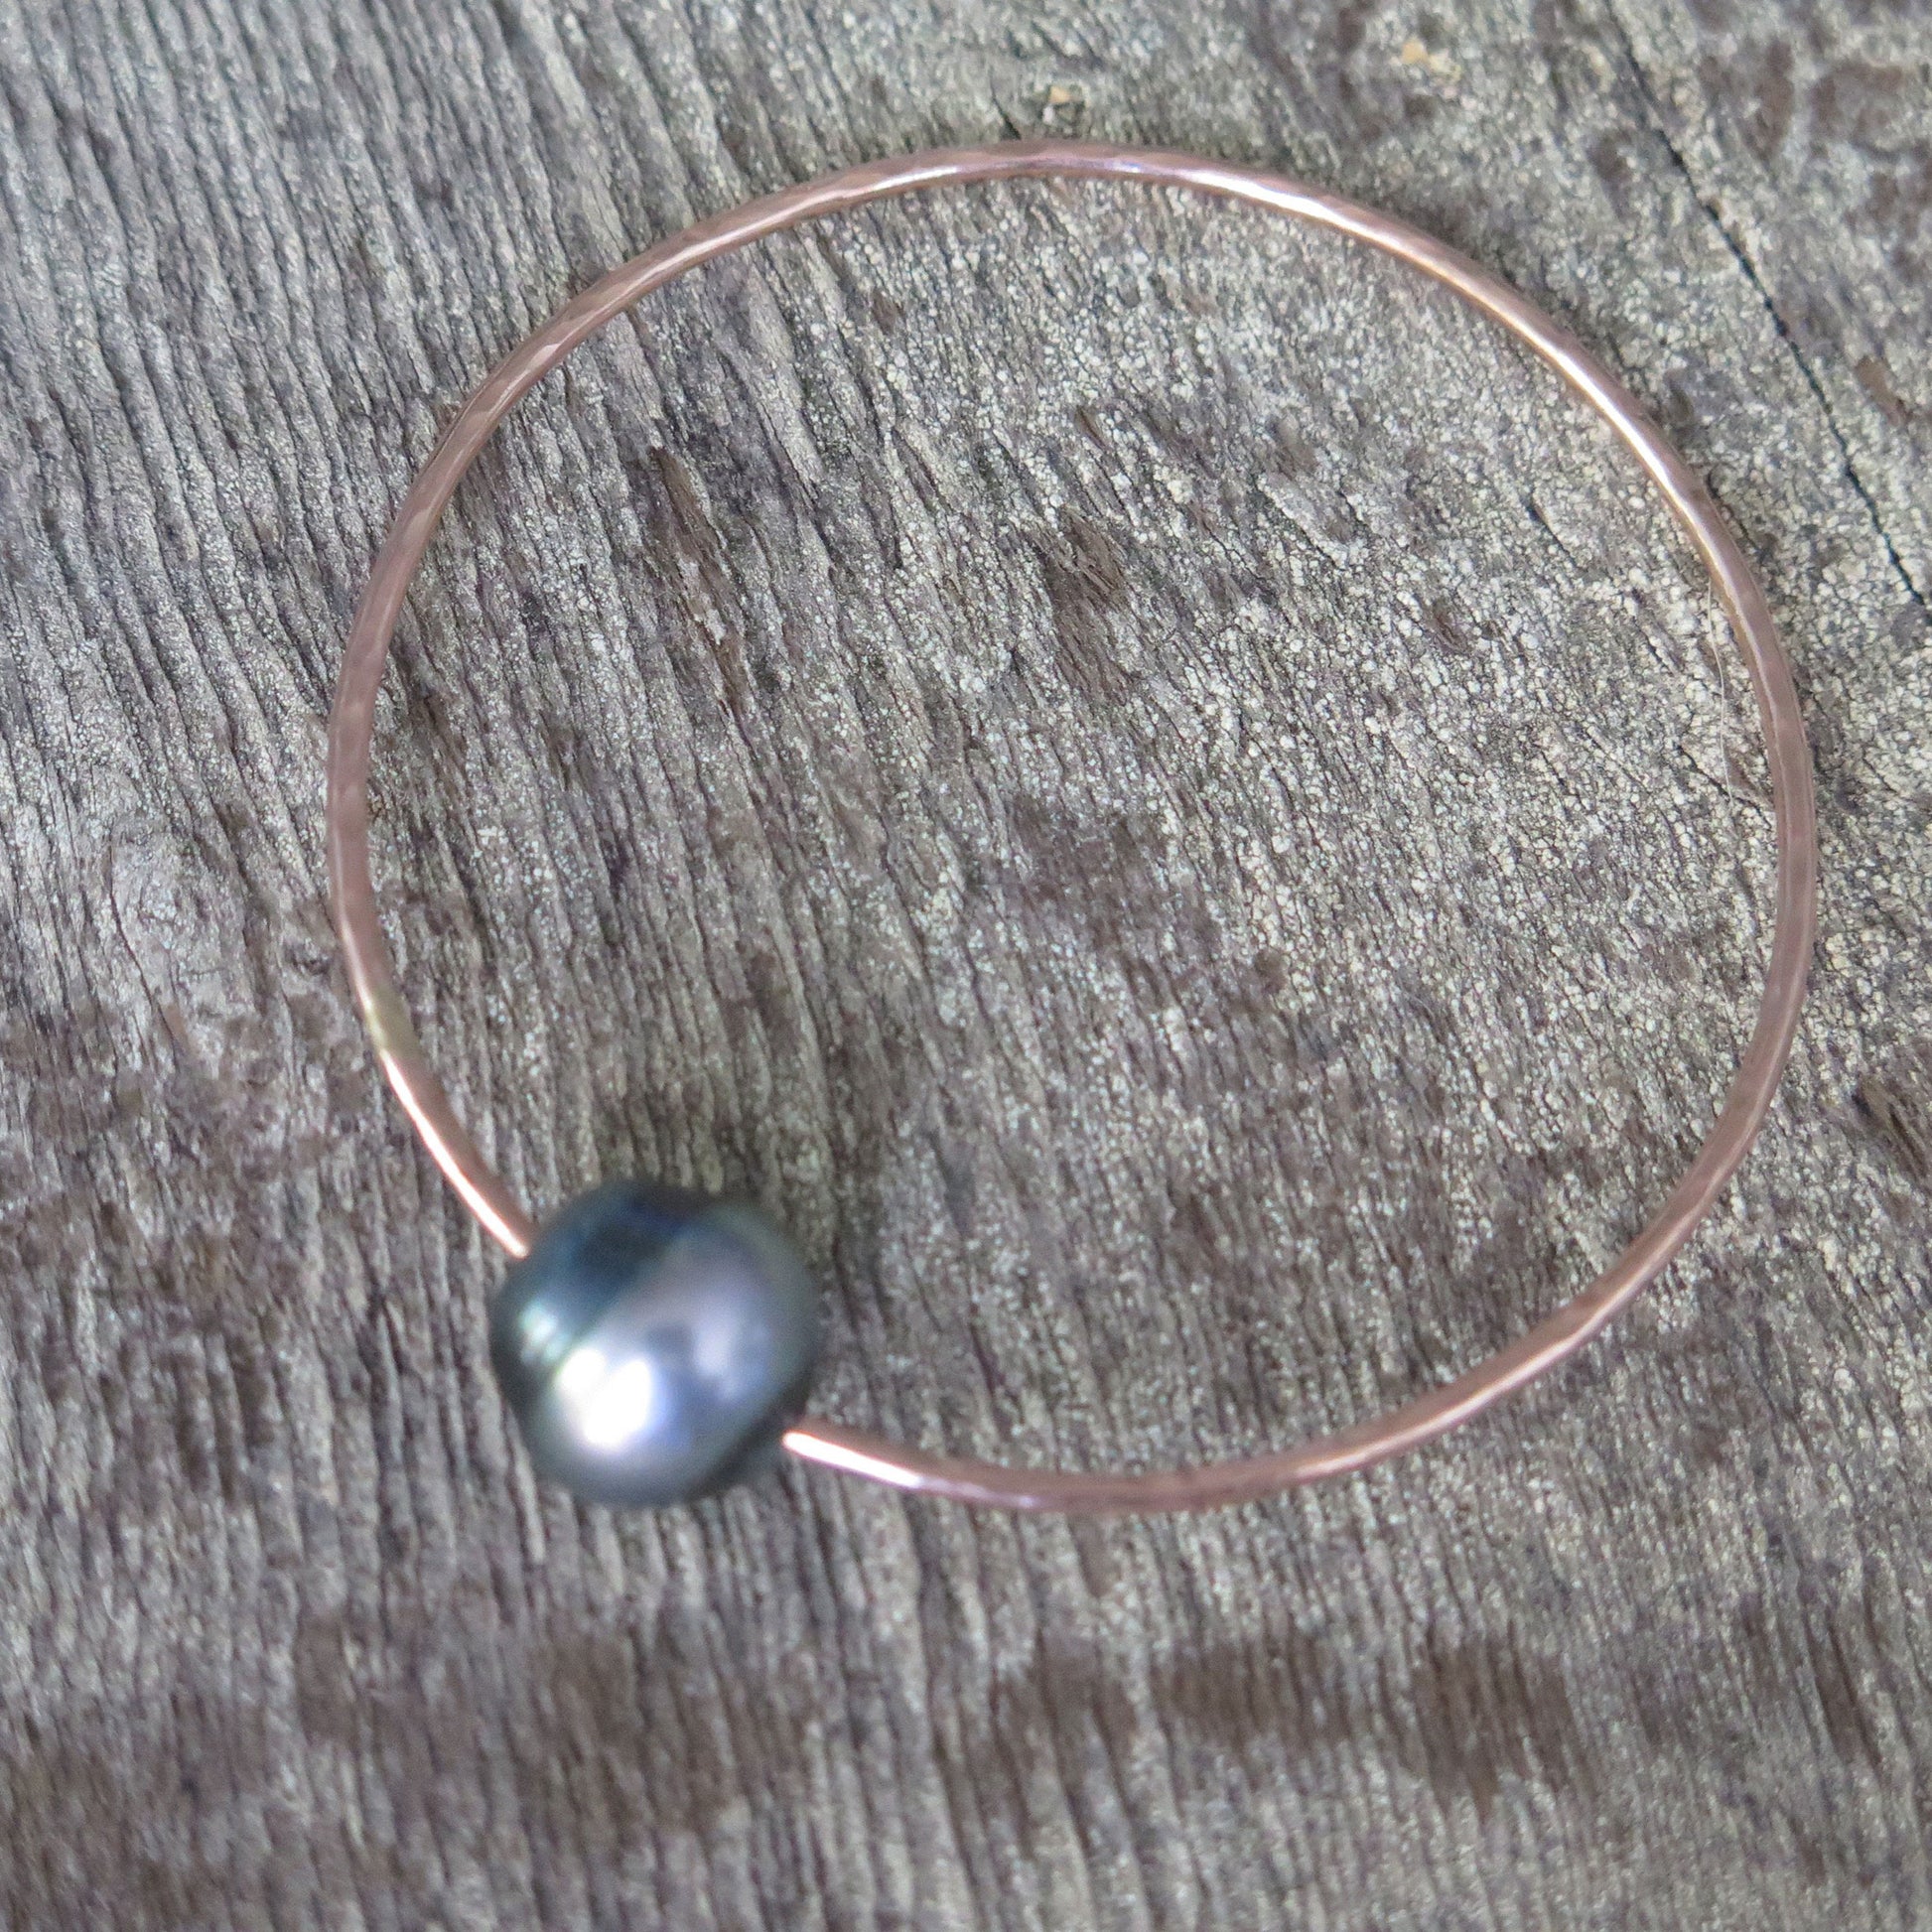 a single black pearl on a rose gold wire shaped into a bangle sits on a wooden background